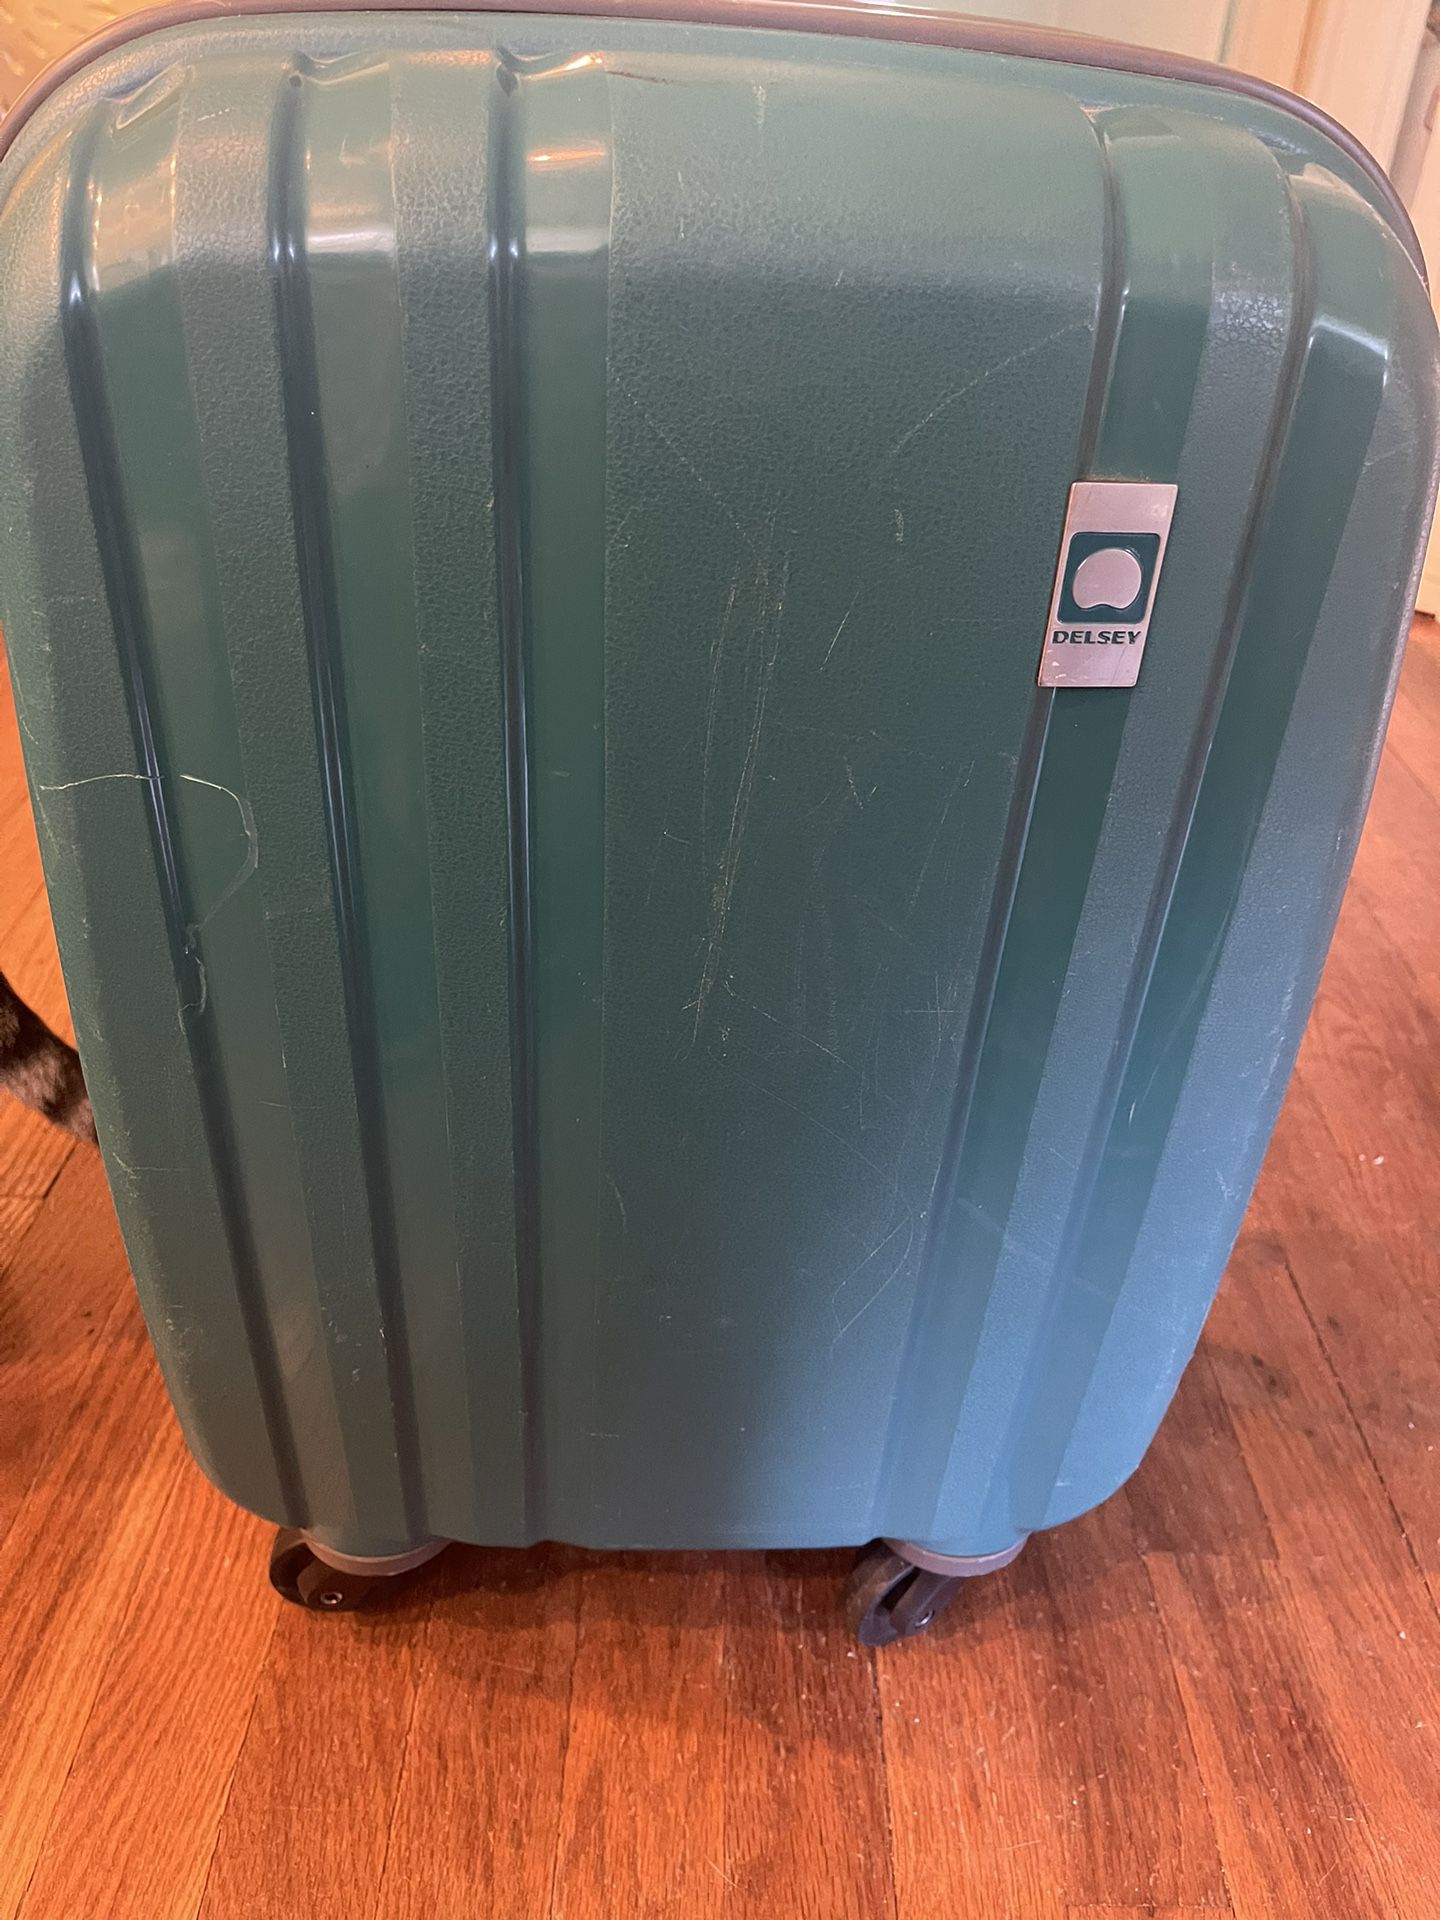 Delsey Hard Plastic Carry On Suitcase 